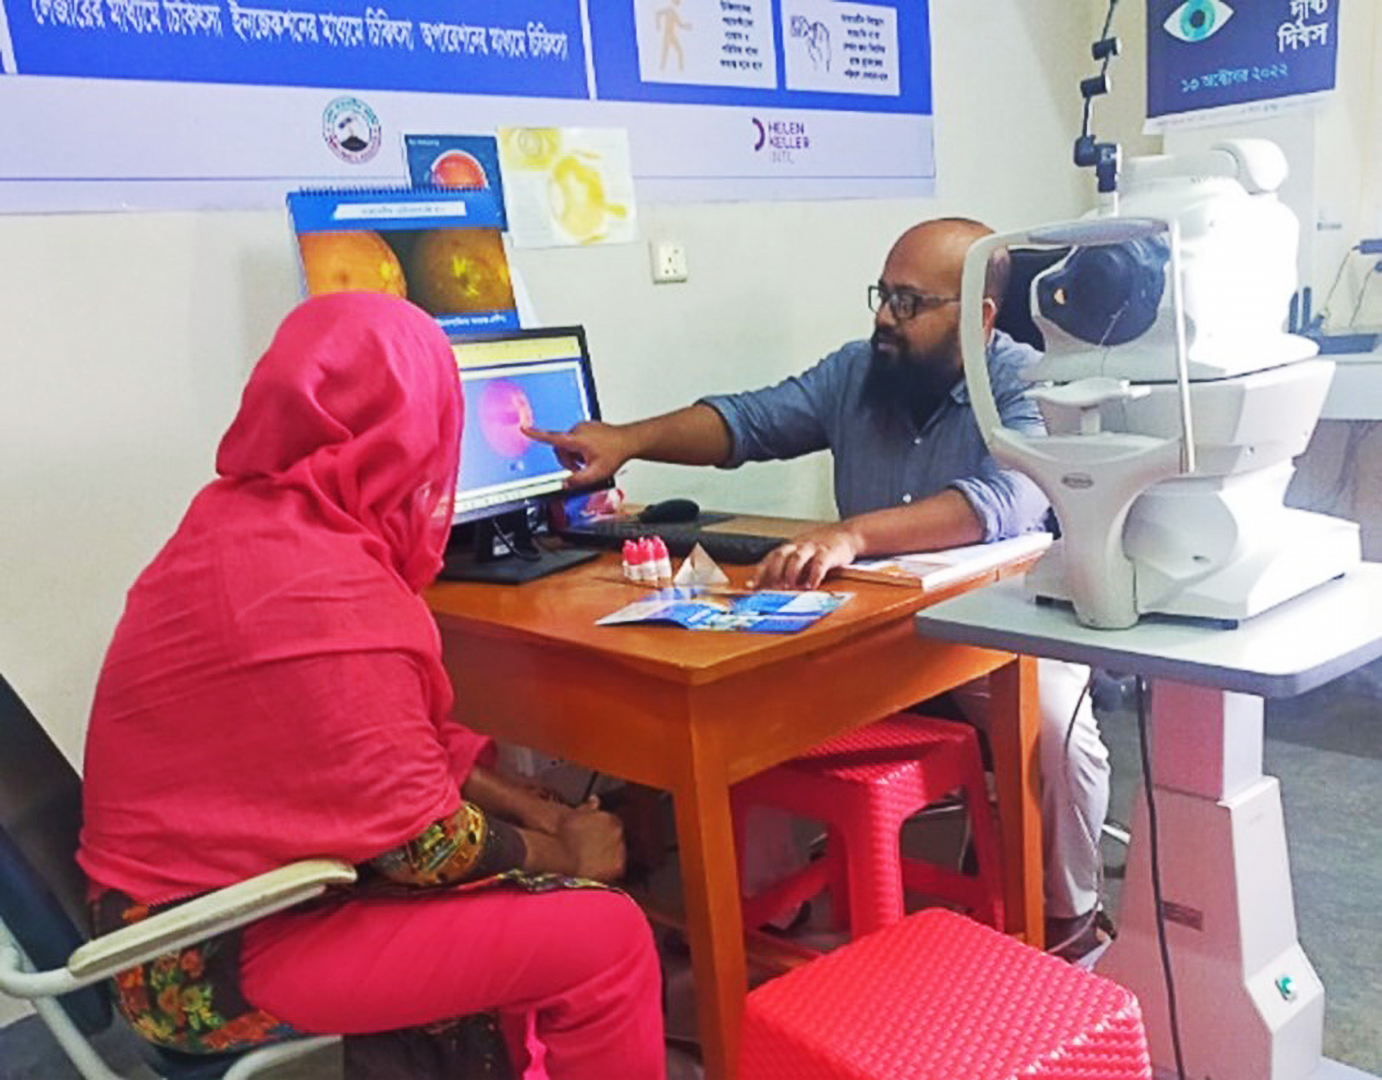 A woman in a bright pink sari sits across the table from a bald man wearing glasses. The man points to an image of a retina on a computer screen.